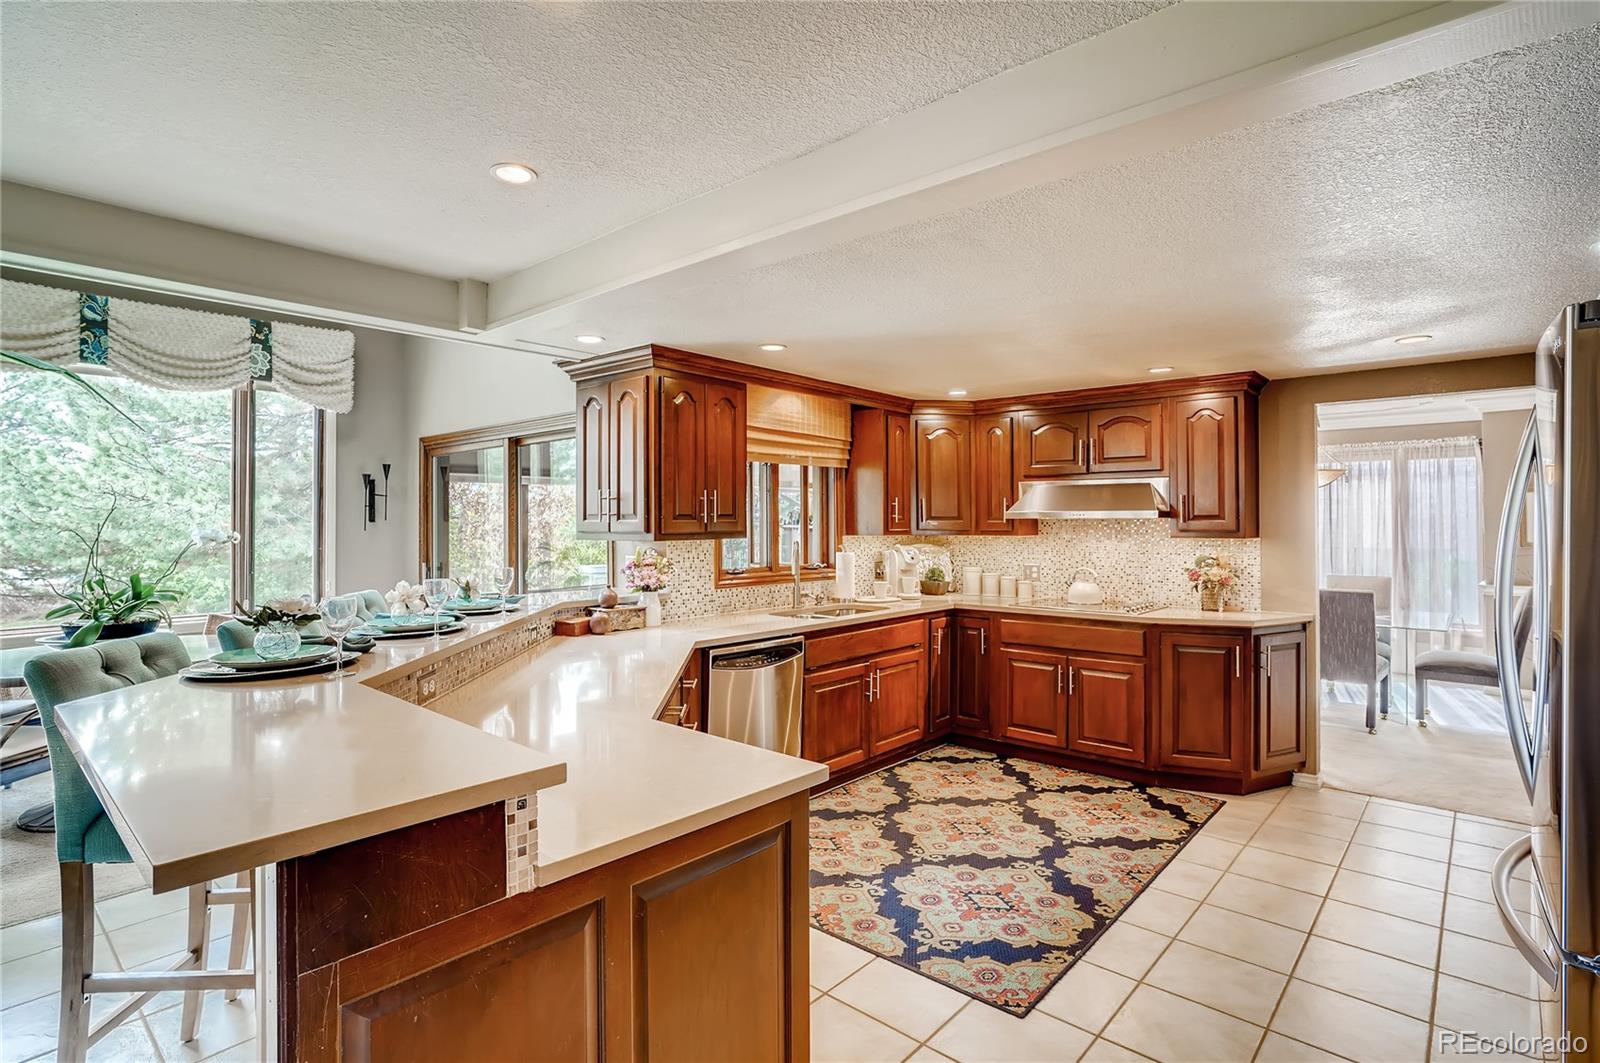 Report Image for 15266 W 72nd Place,Arvada, Colorado